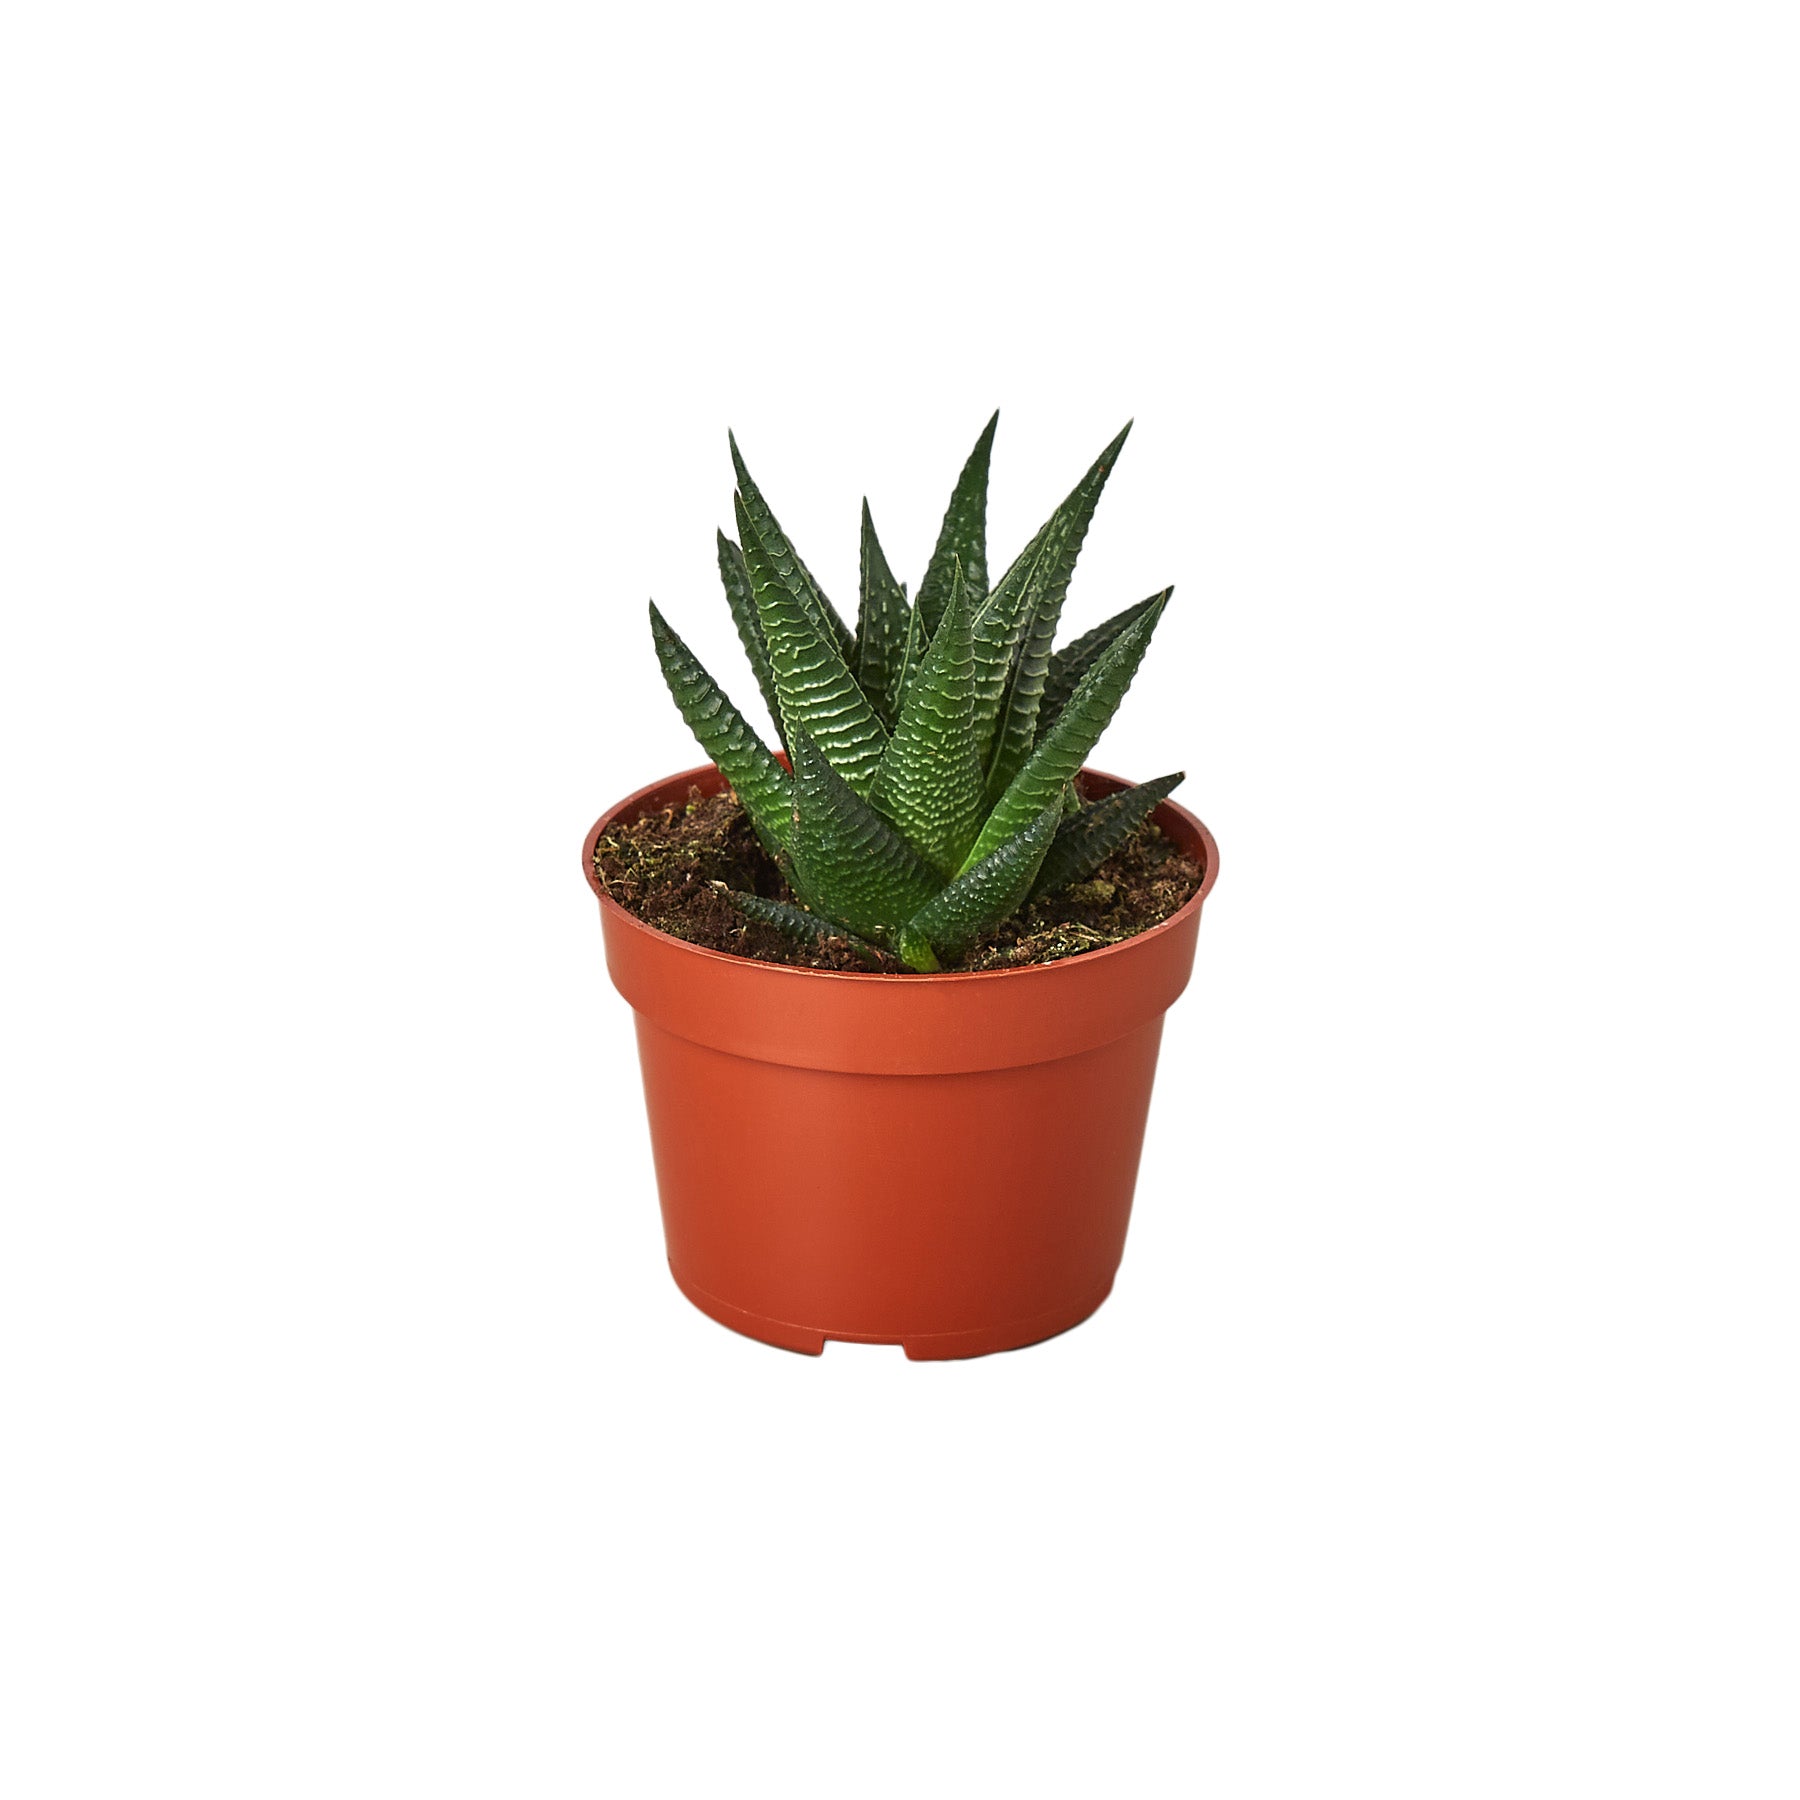 Aloe vera plant in a pot on a white background, available at the best garden nursery near me.